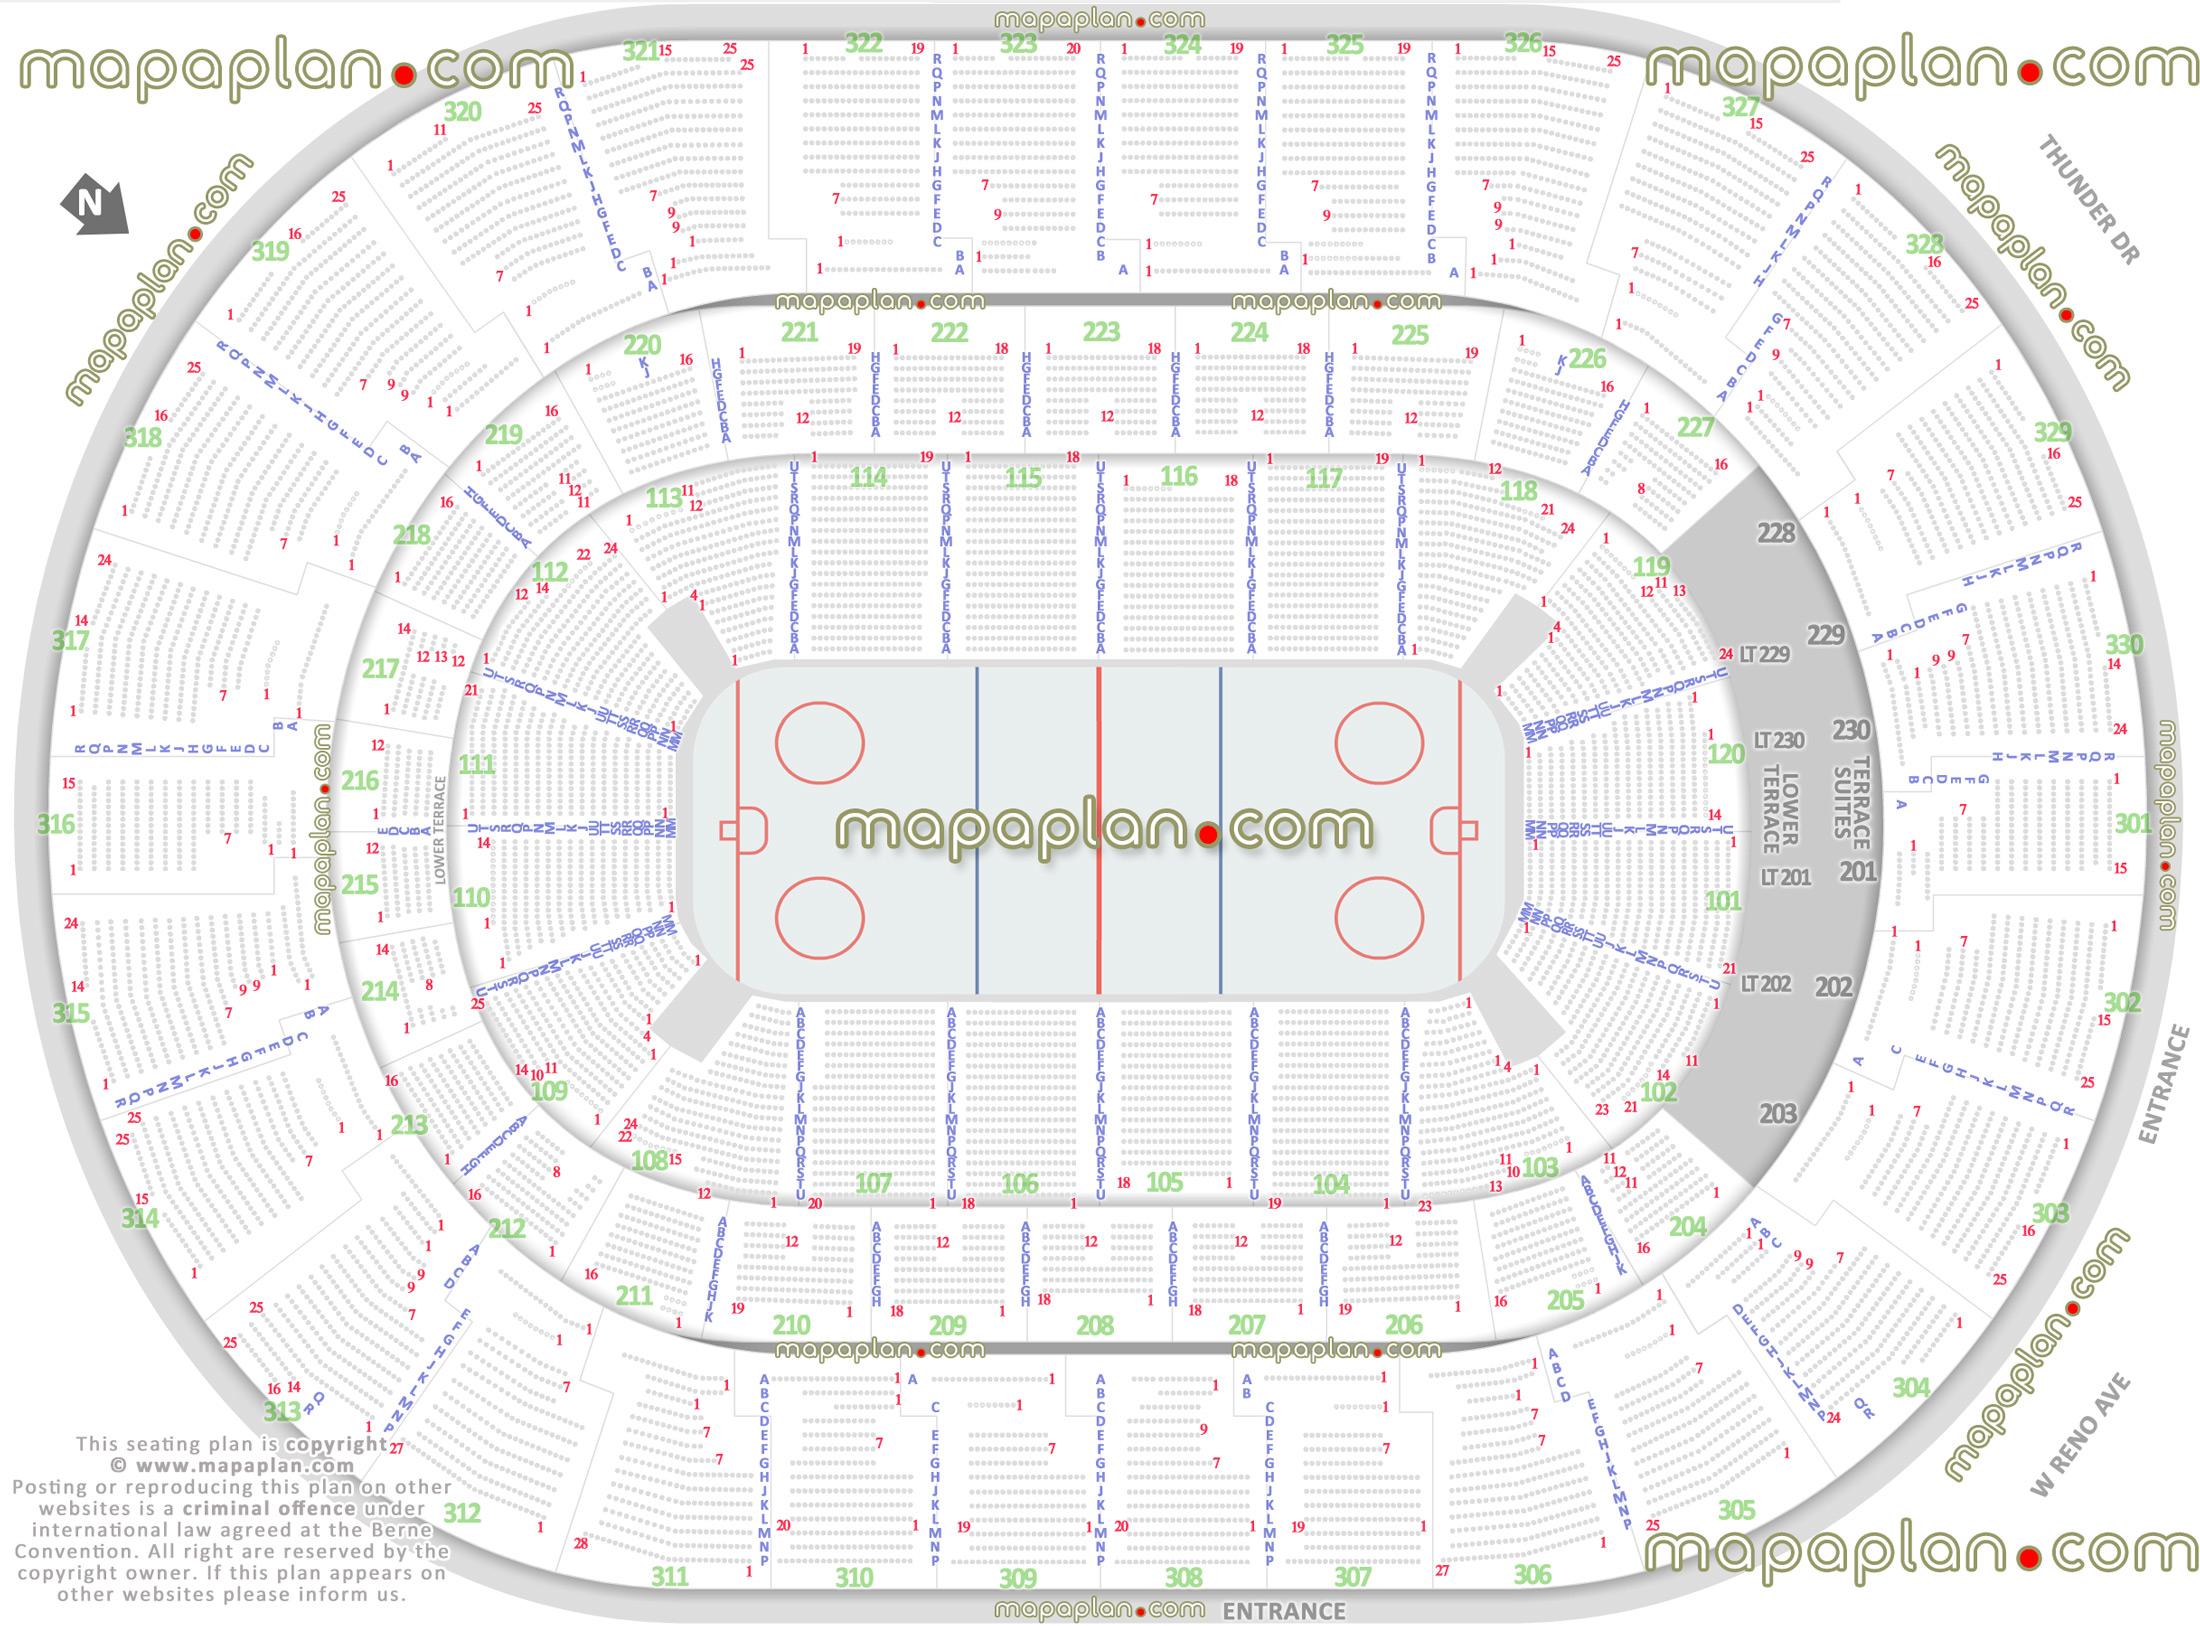 hockey nhl games arena seating capacity arrangement diagram chesapeake energy arena oklahoma city interactive virtual 3d detailed layout glass rinkside seats full exact row numbers plan seats row stadium bowl lower upper level sections Oklahoma City Chesapeake Energy Arena seating chart